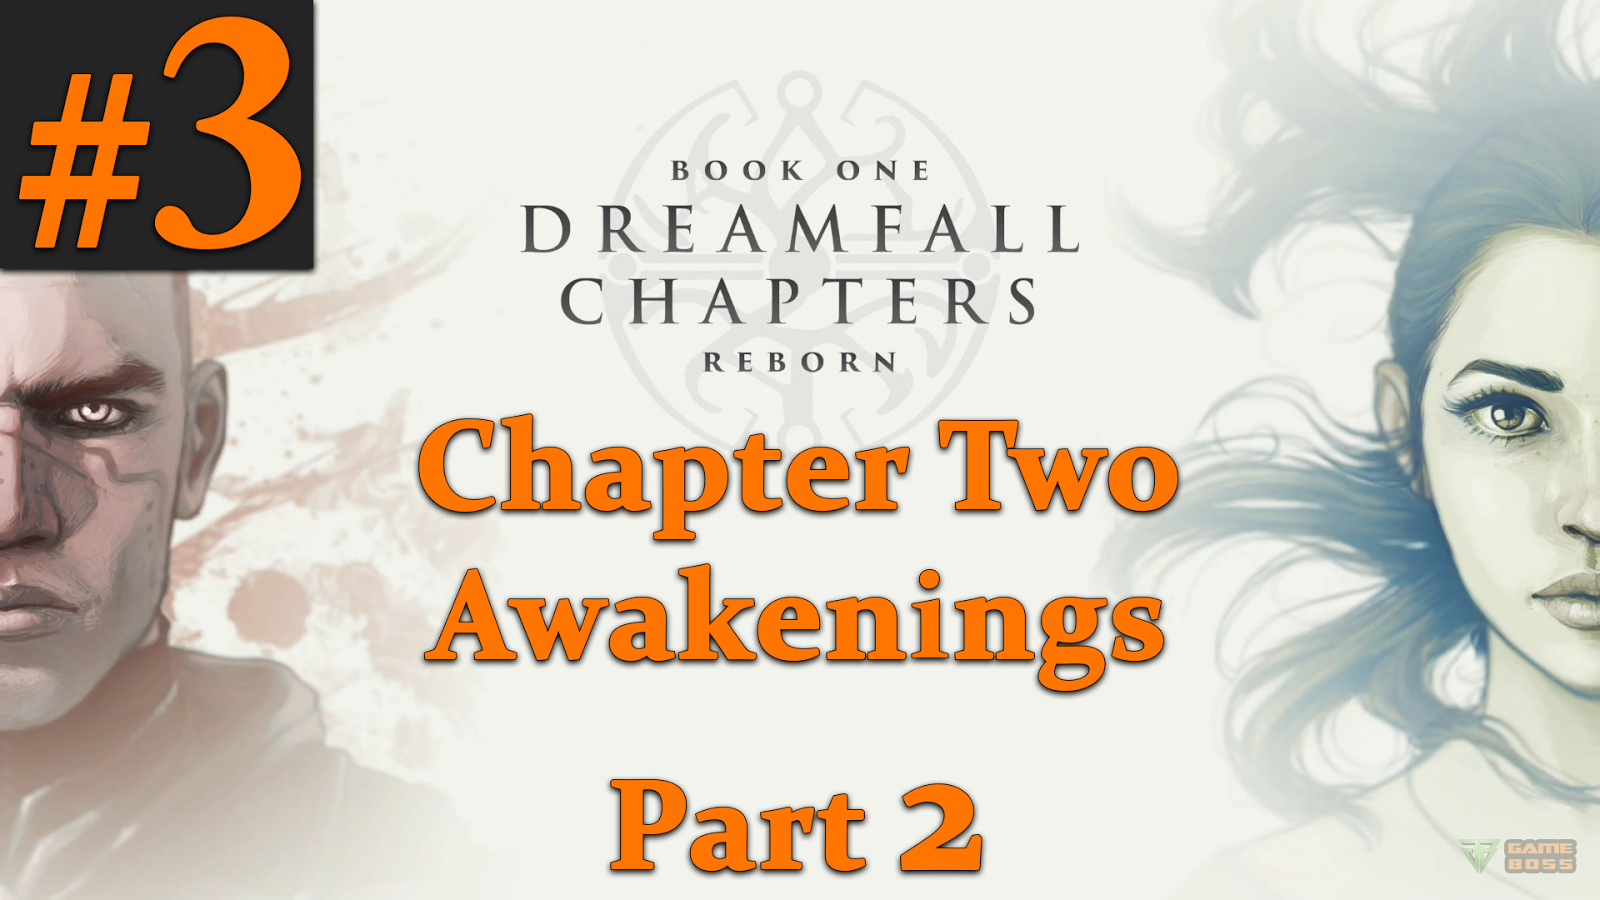 Chapter 2 book 2. Dreamfall Chapters геймплей. Dreamfall Chapters Gameplay. Dreamfall Chapters баба Яга. Dreamfall Chapters отзывы.